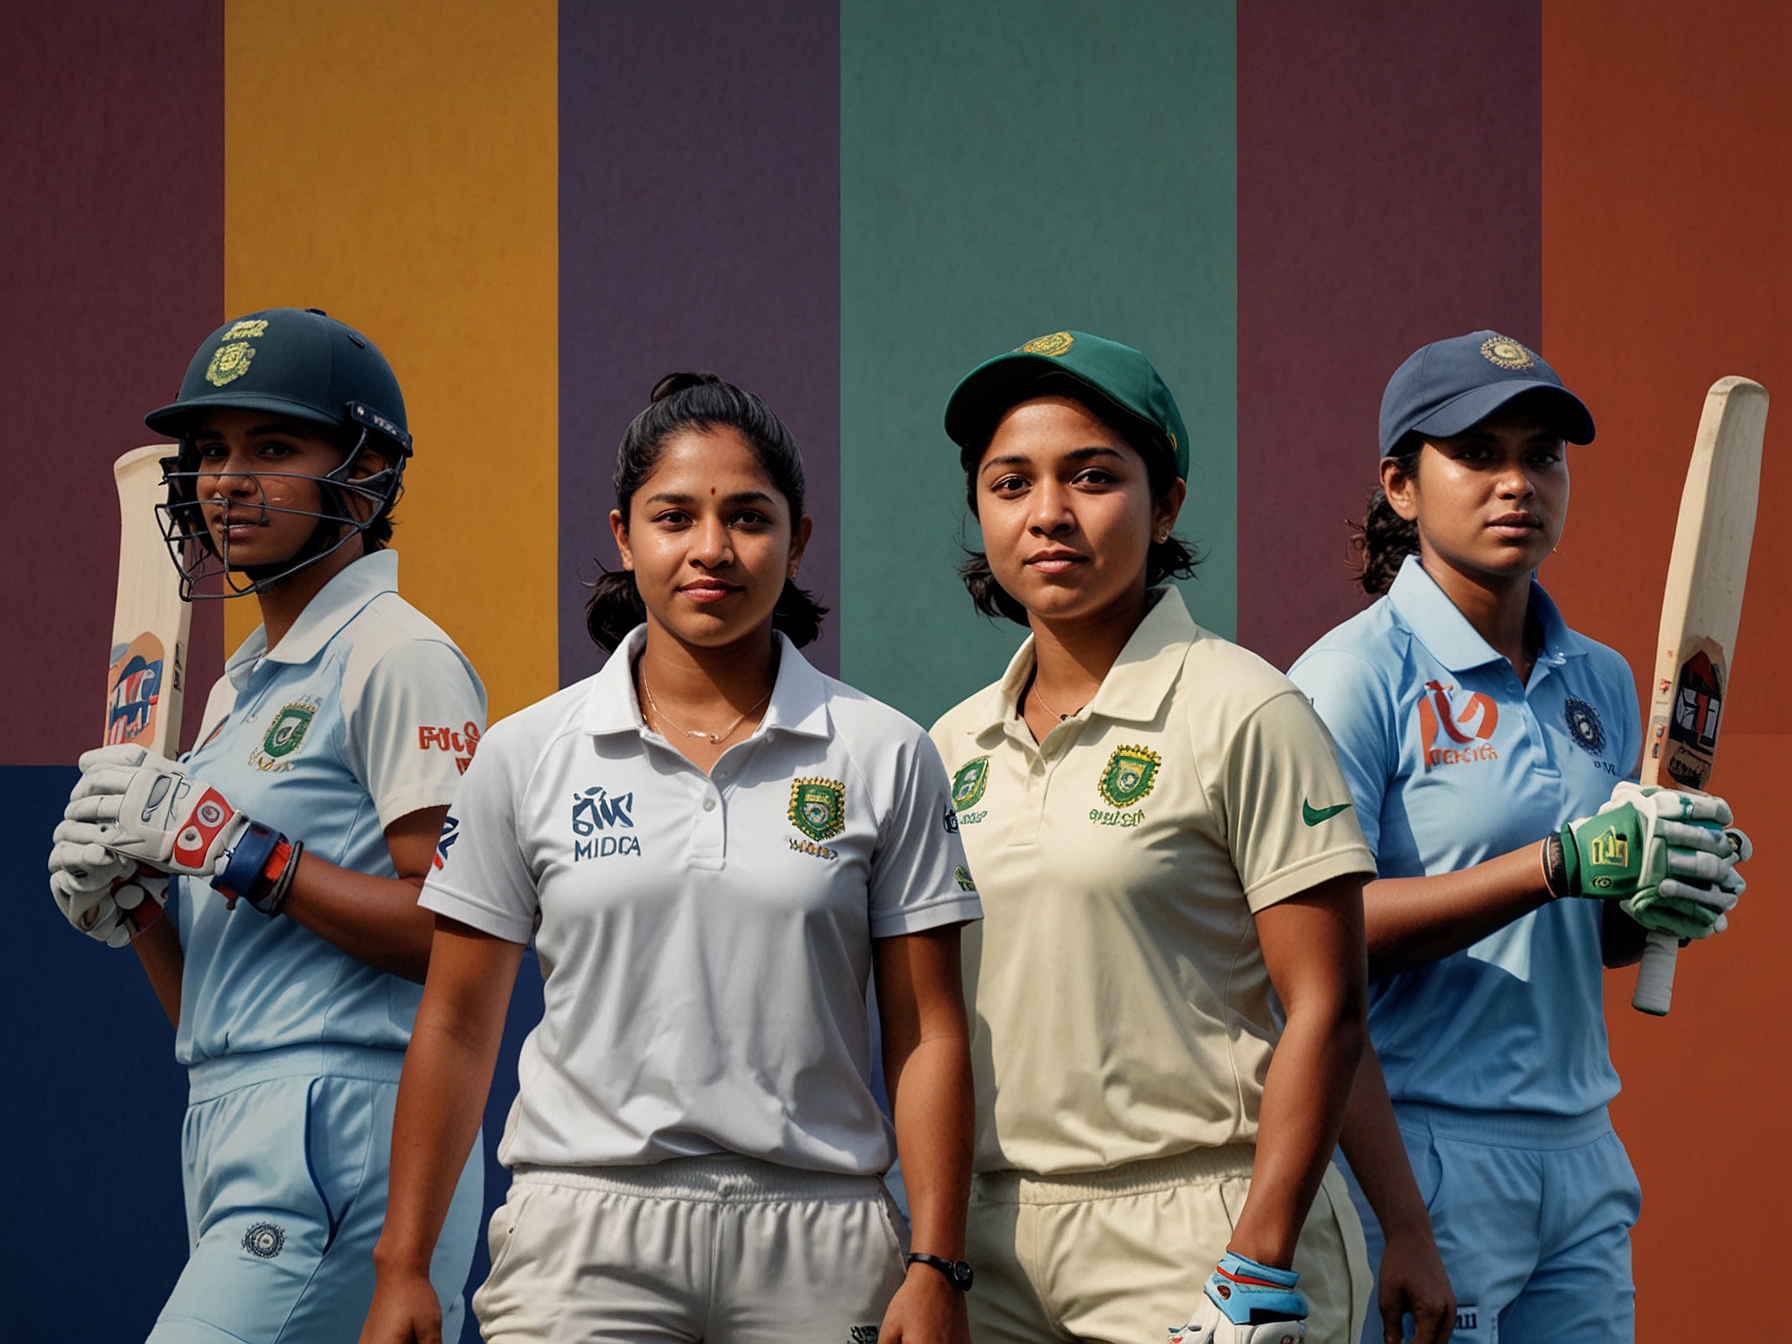 Collage of key players from India and South Africa women's cricket teams, including Harmanpreet Kaur and Lizelle Lee, highlighting their roles and potential impact in the upcoming Test match.